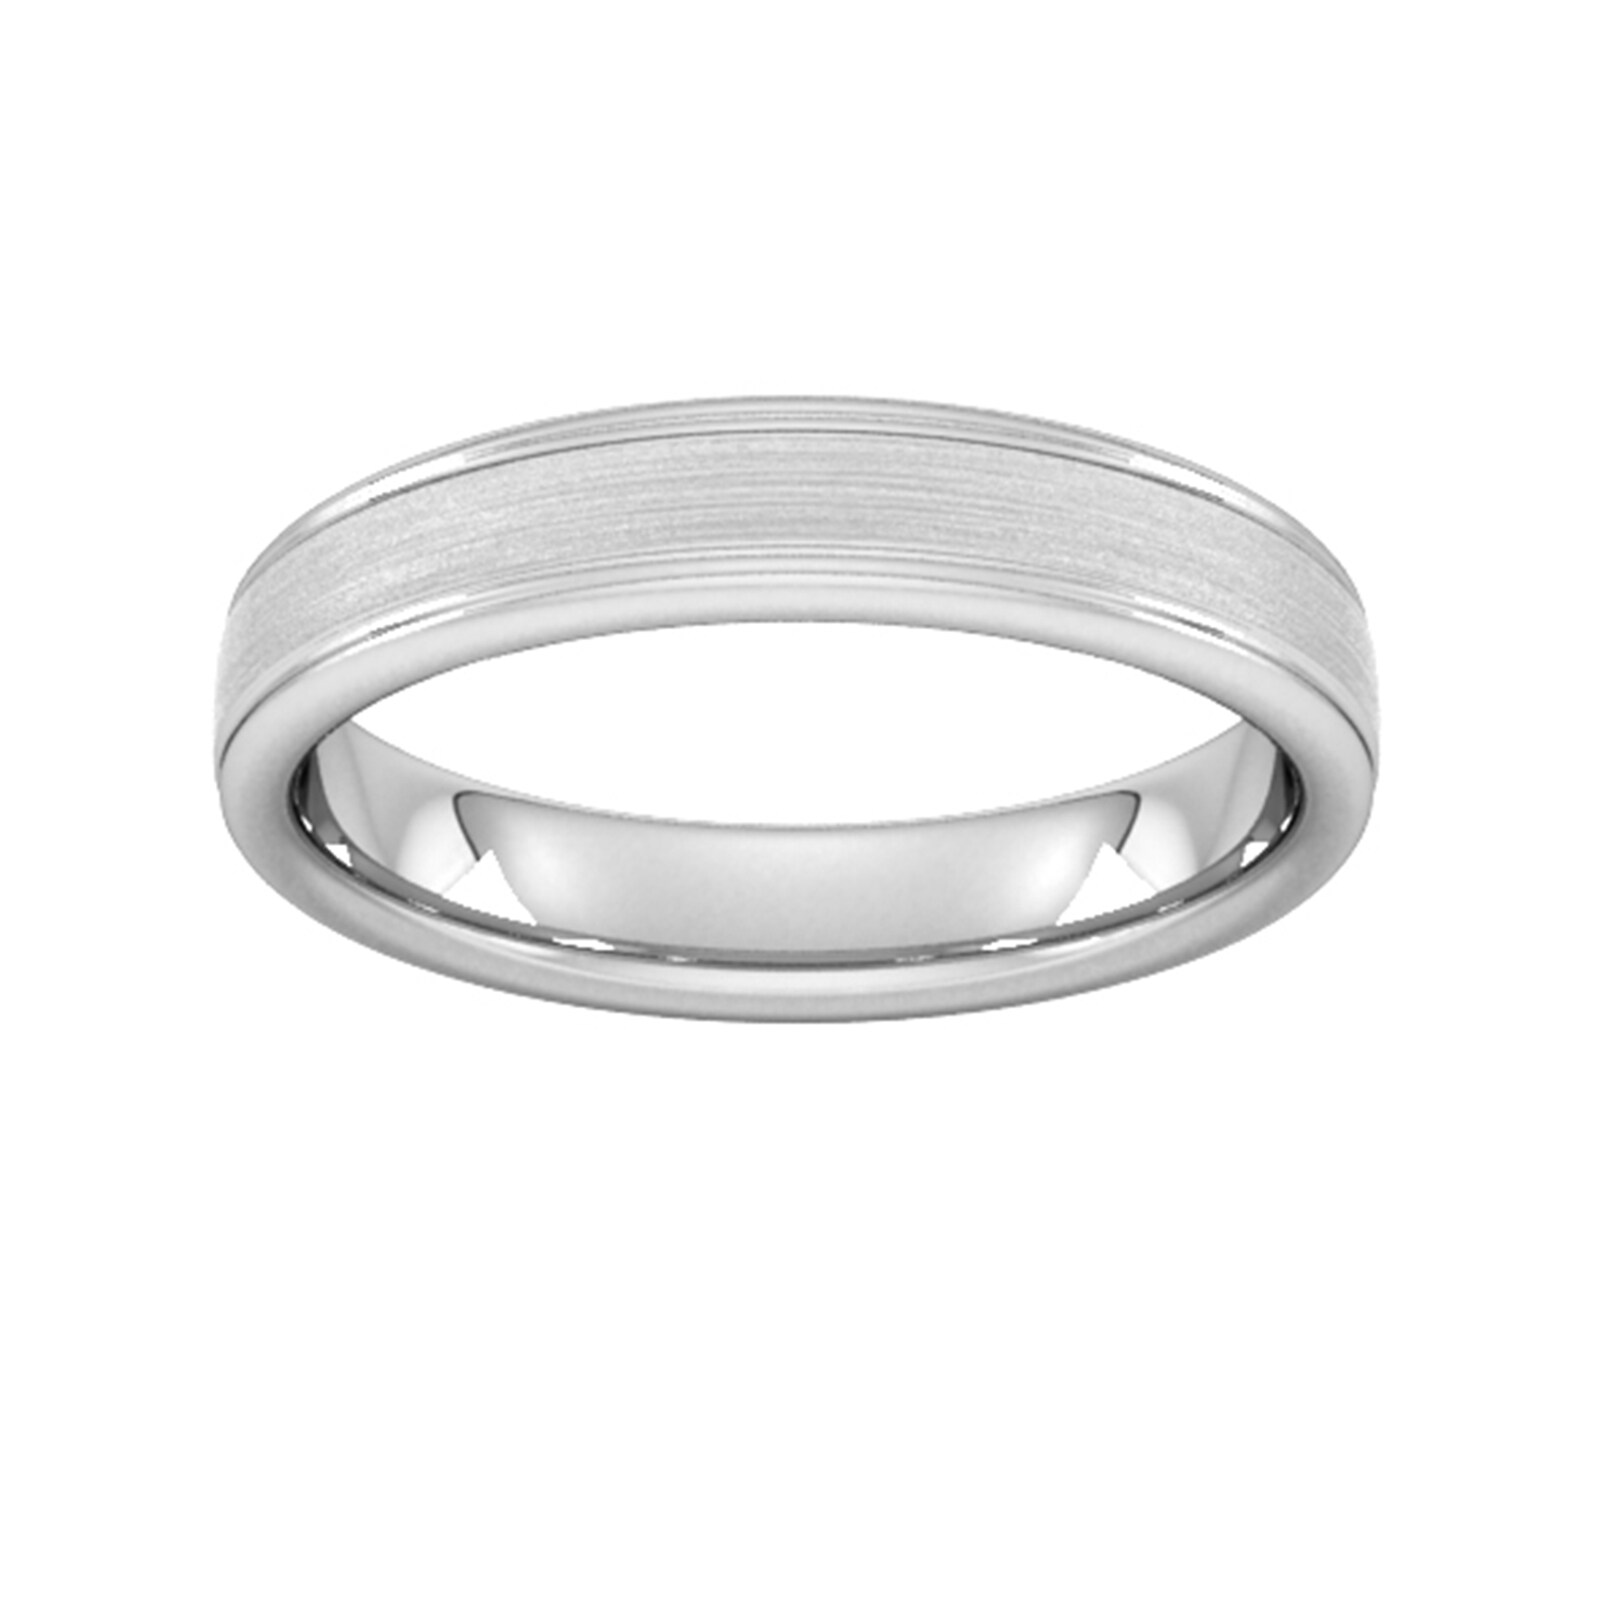 4mm Flat Court Heavy Matt Centre With Grooves Wedding Ring In 18 Carat White Gold - Ring Size K